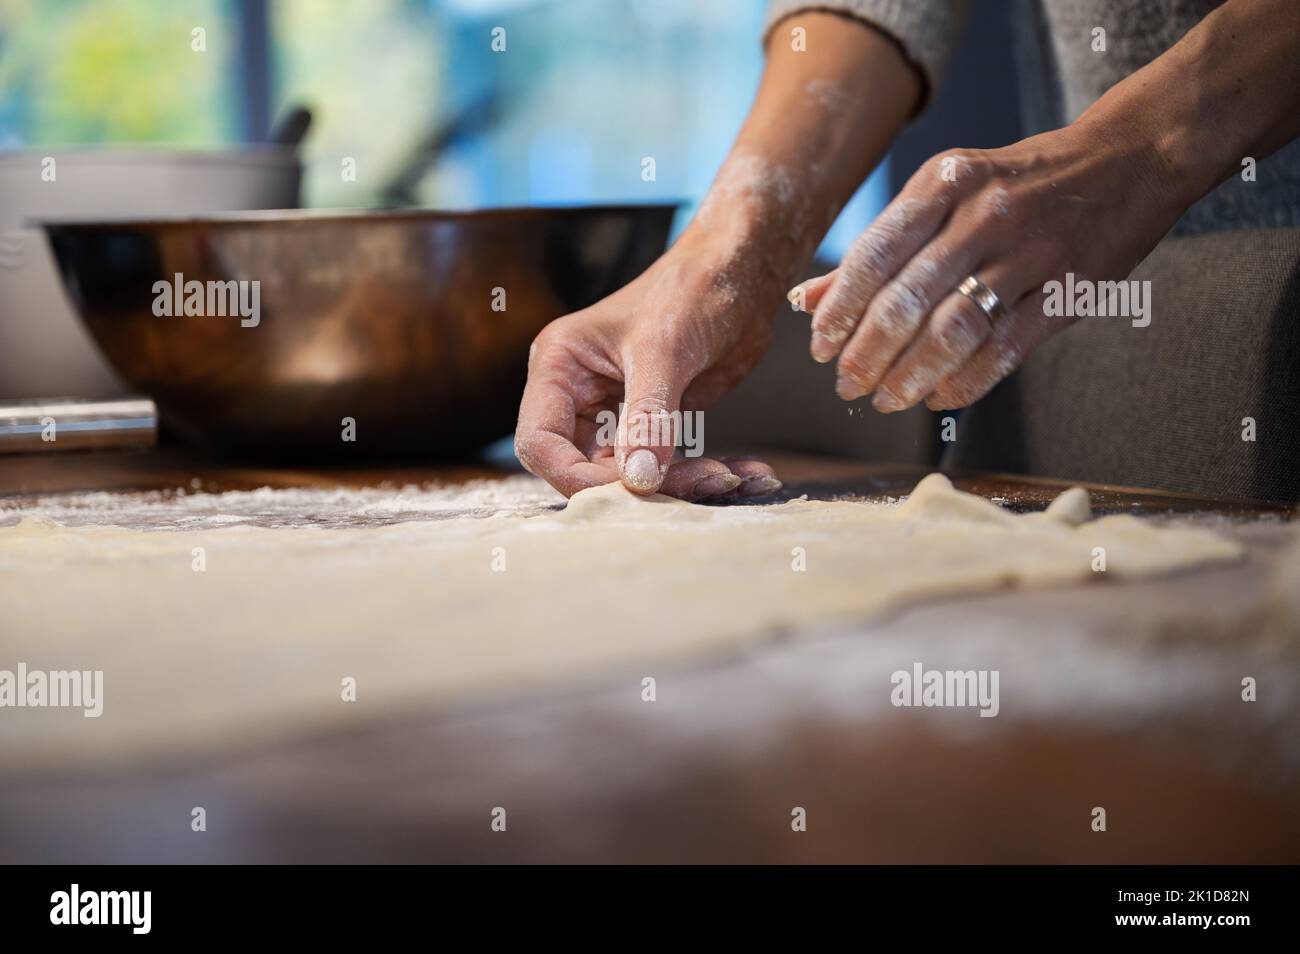 Low angle view of a woman preparing homemade pastry dough for a strudel or pie, stetching it on a flour dusted wooden table. Stock Photo